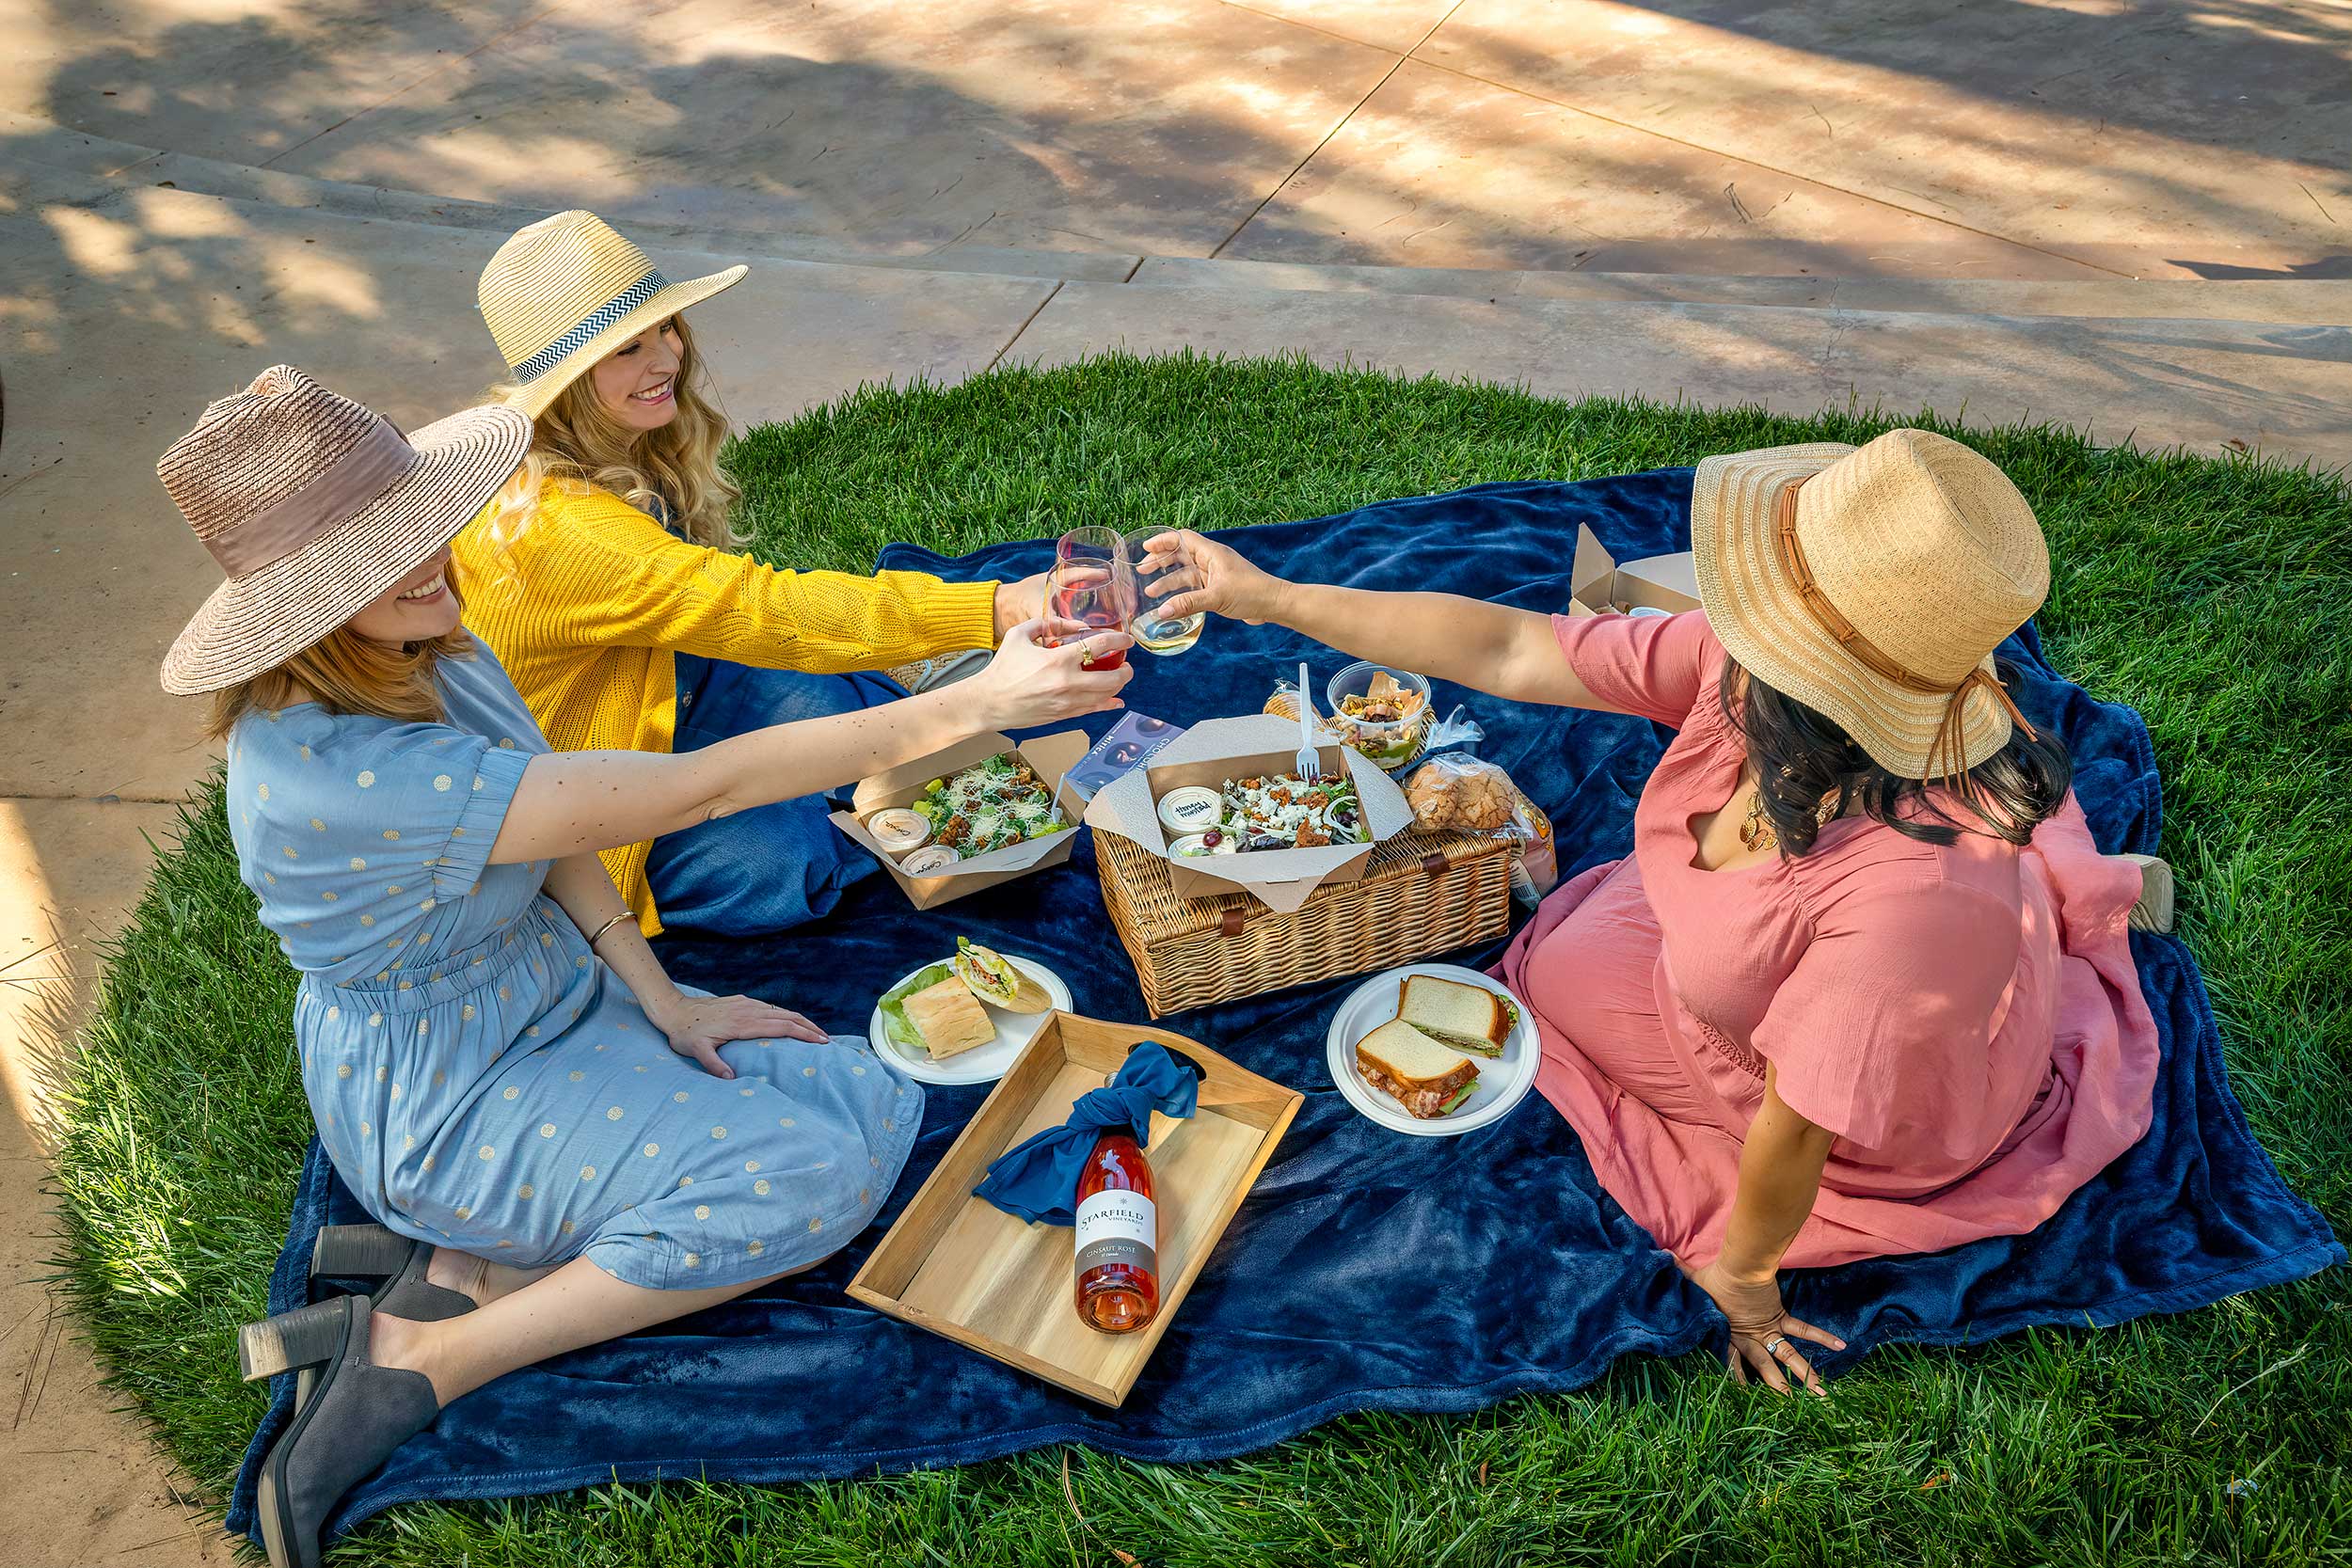 Starfield Wine Country Picnics Culinary Adventures | Food & Wine Pairing | Outdoor Activities | Wine Tastings | Winery Events